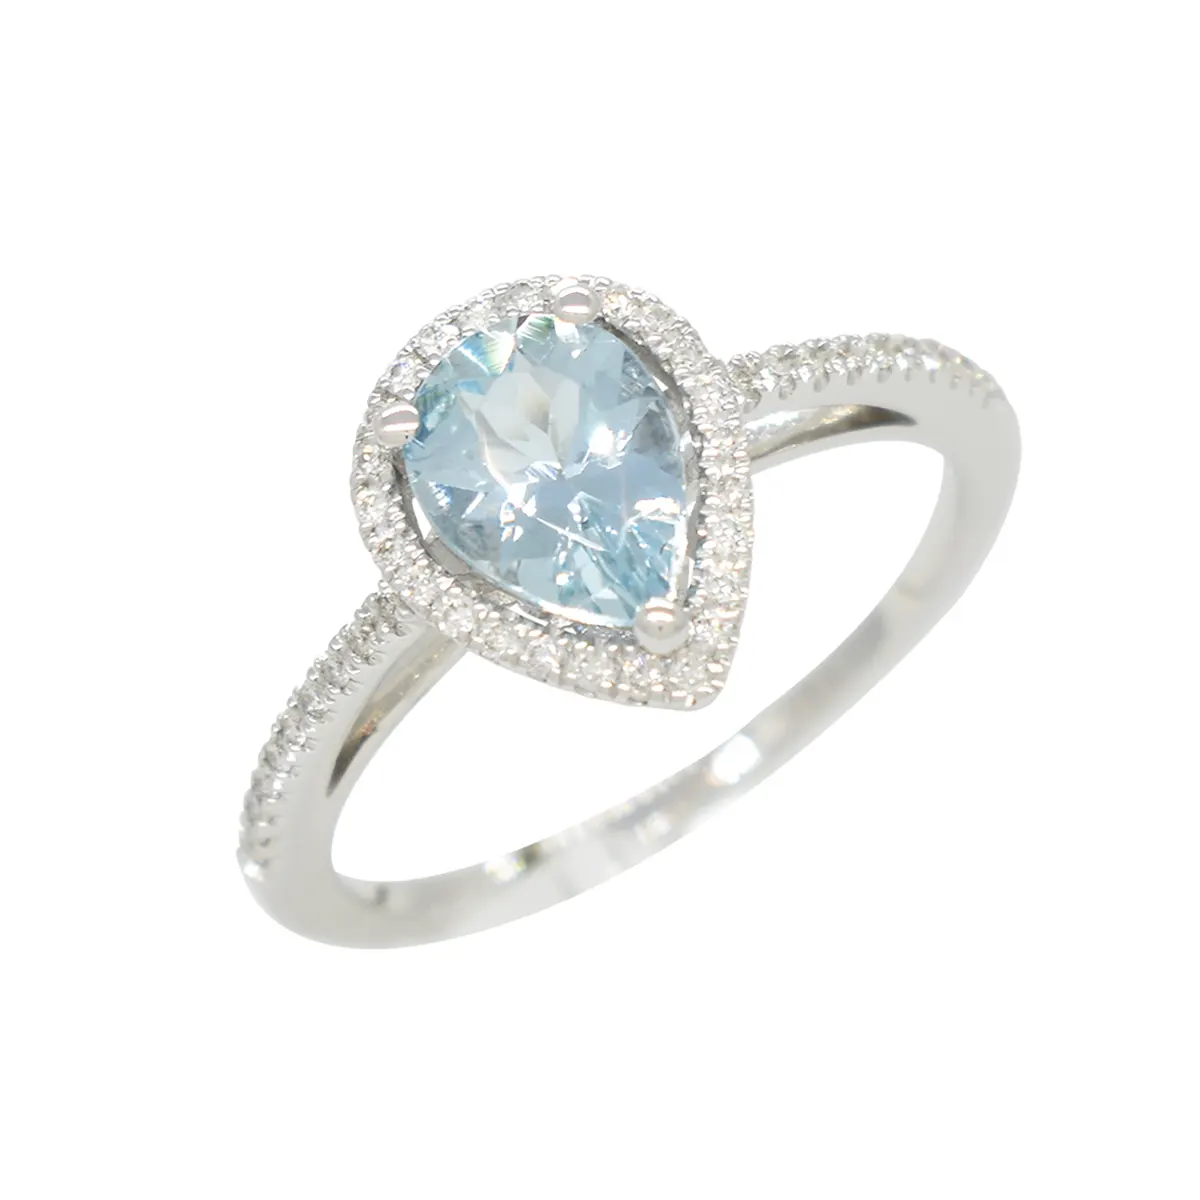 pear-shape-aquamarine-ring-with-round-diamonds-in-white-gold